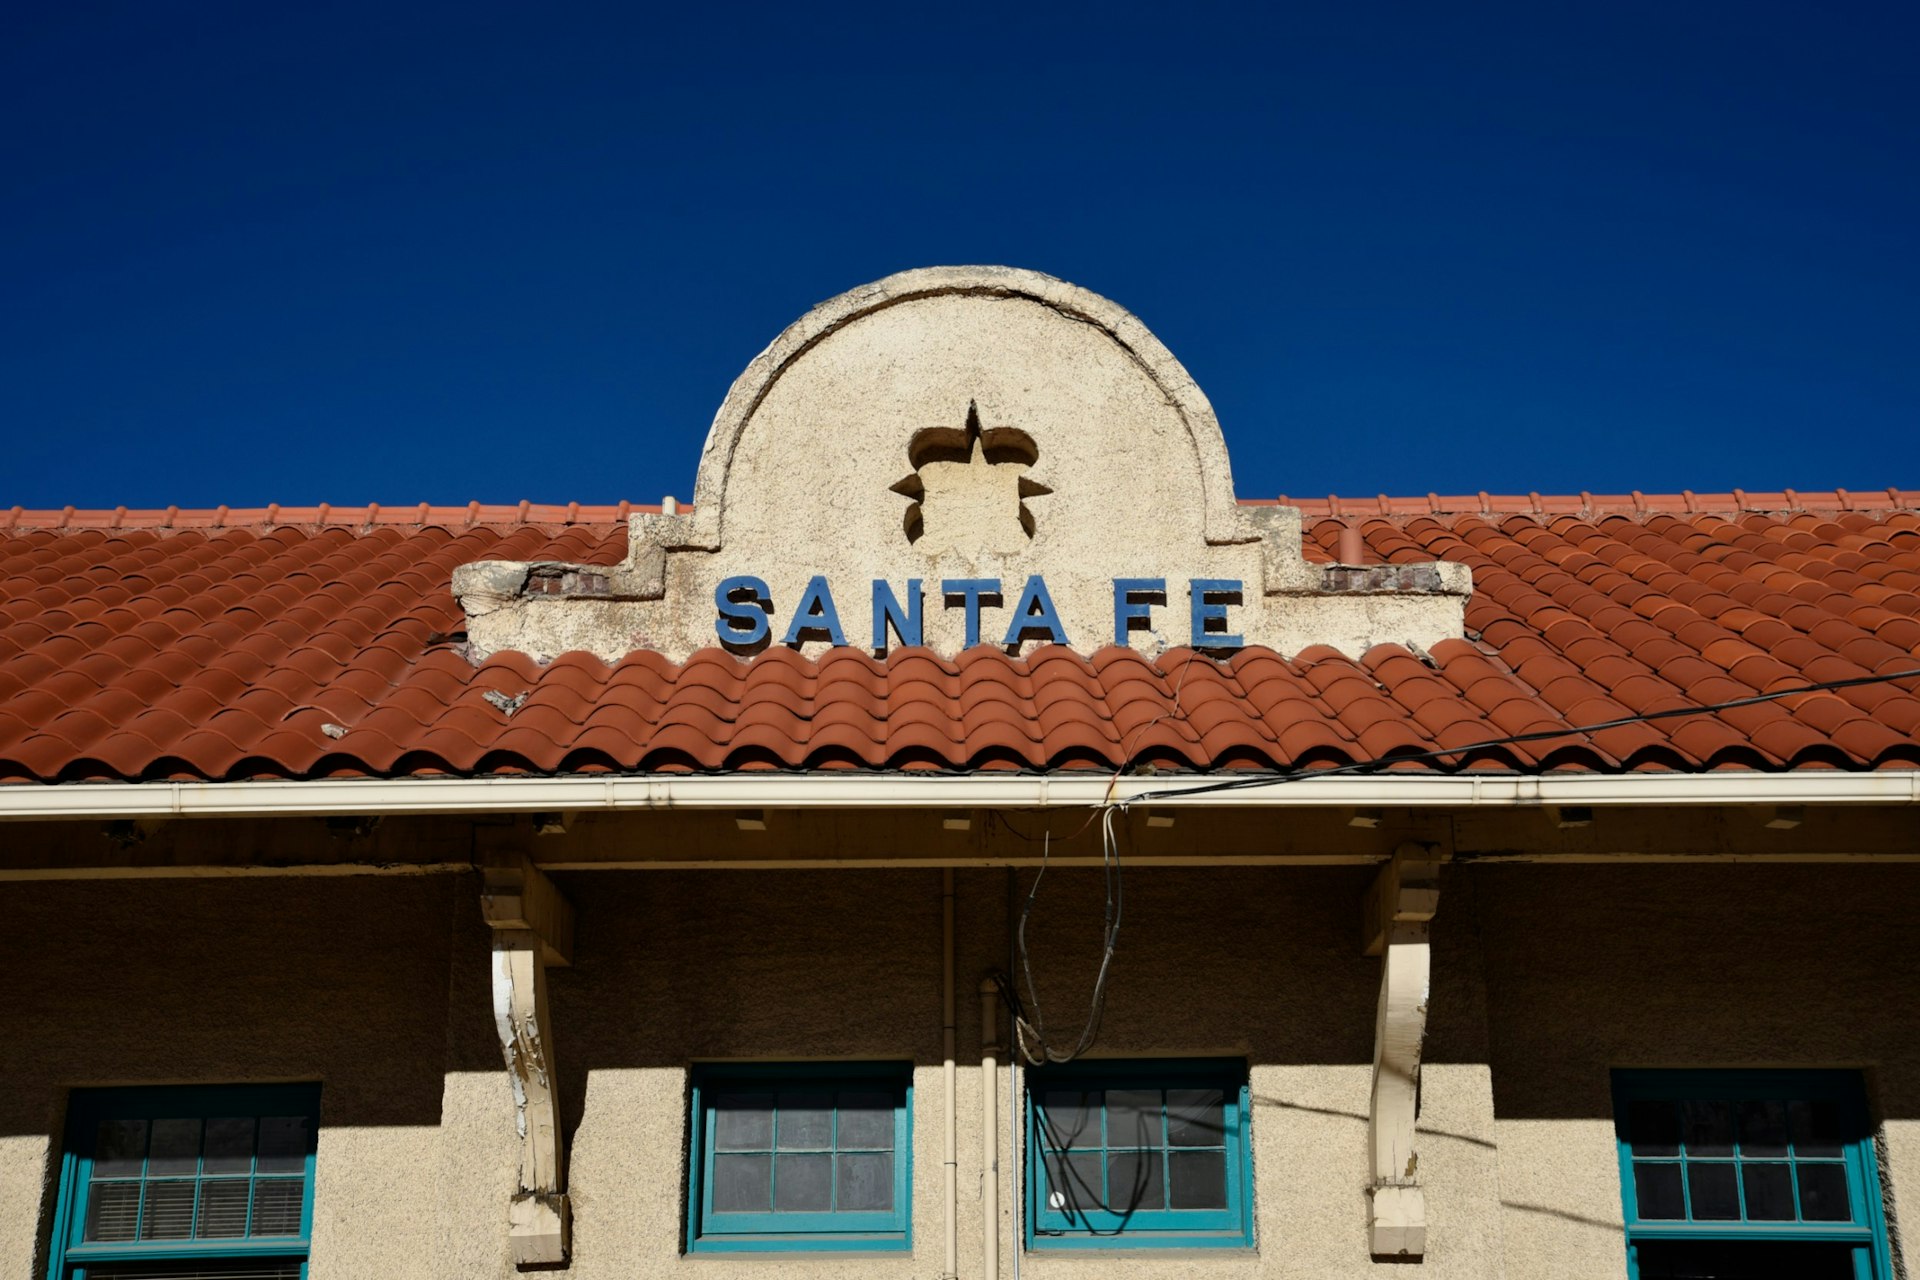 The exterior of the historic Santa Fe Railway depot in New Mexico